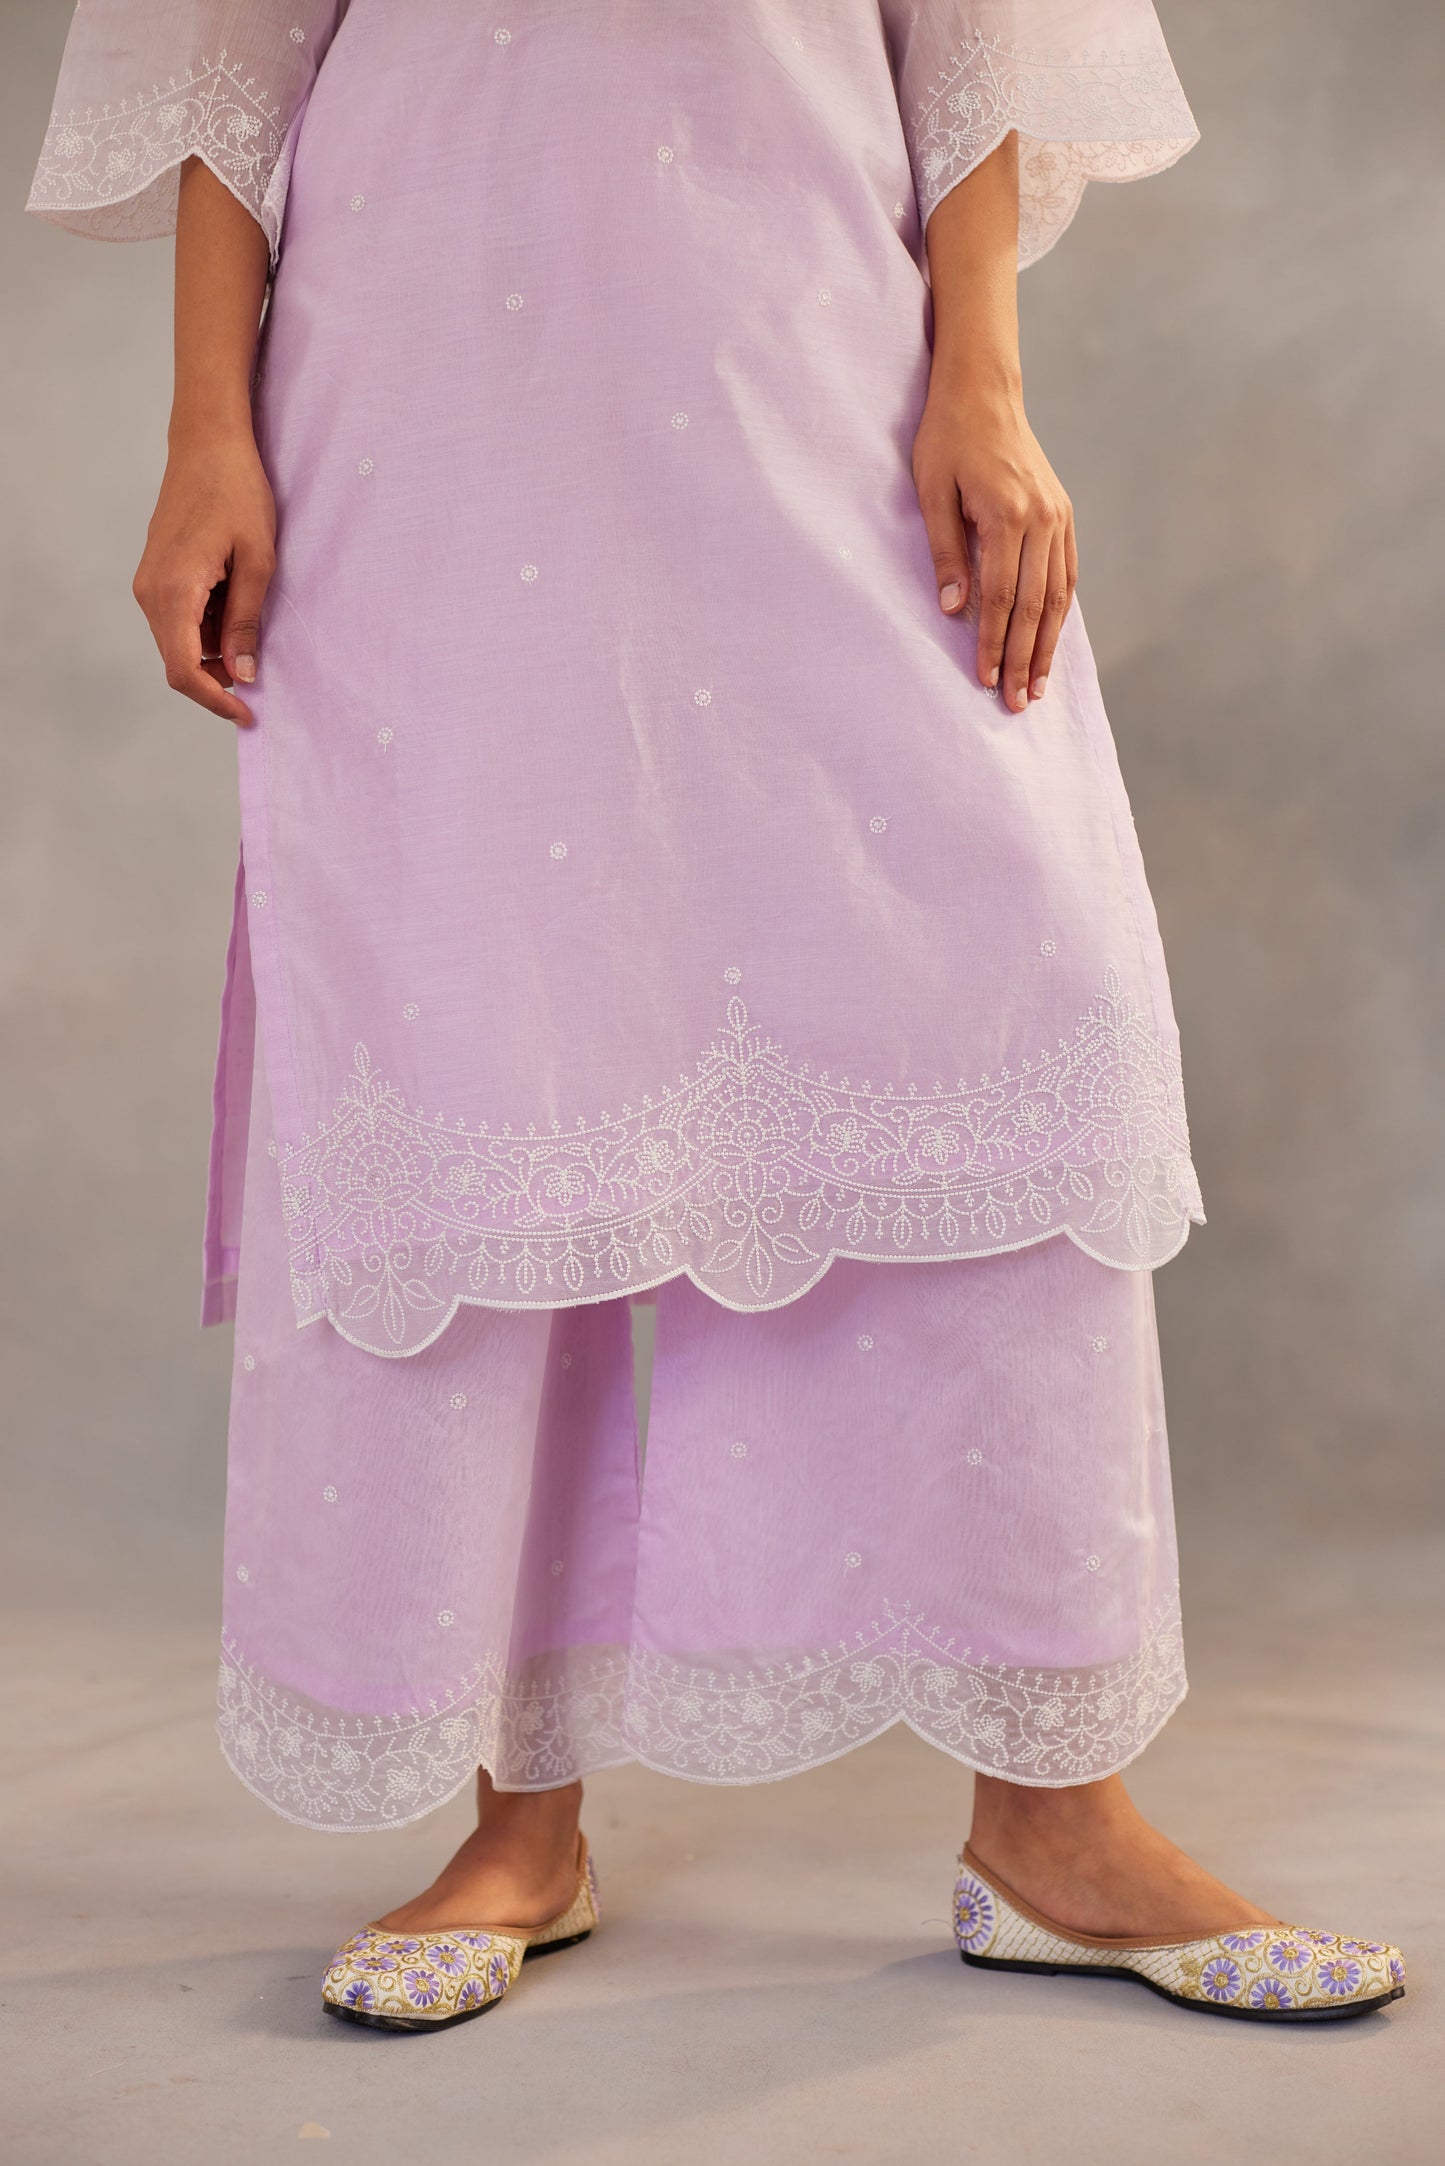 Arushi Sharma in Kesar - Lavender Embroidered Suit Set.